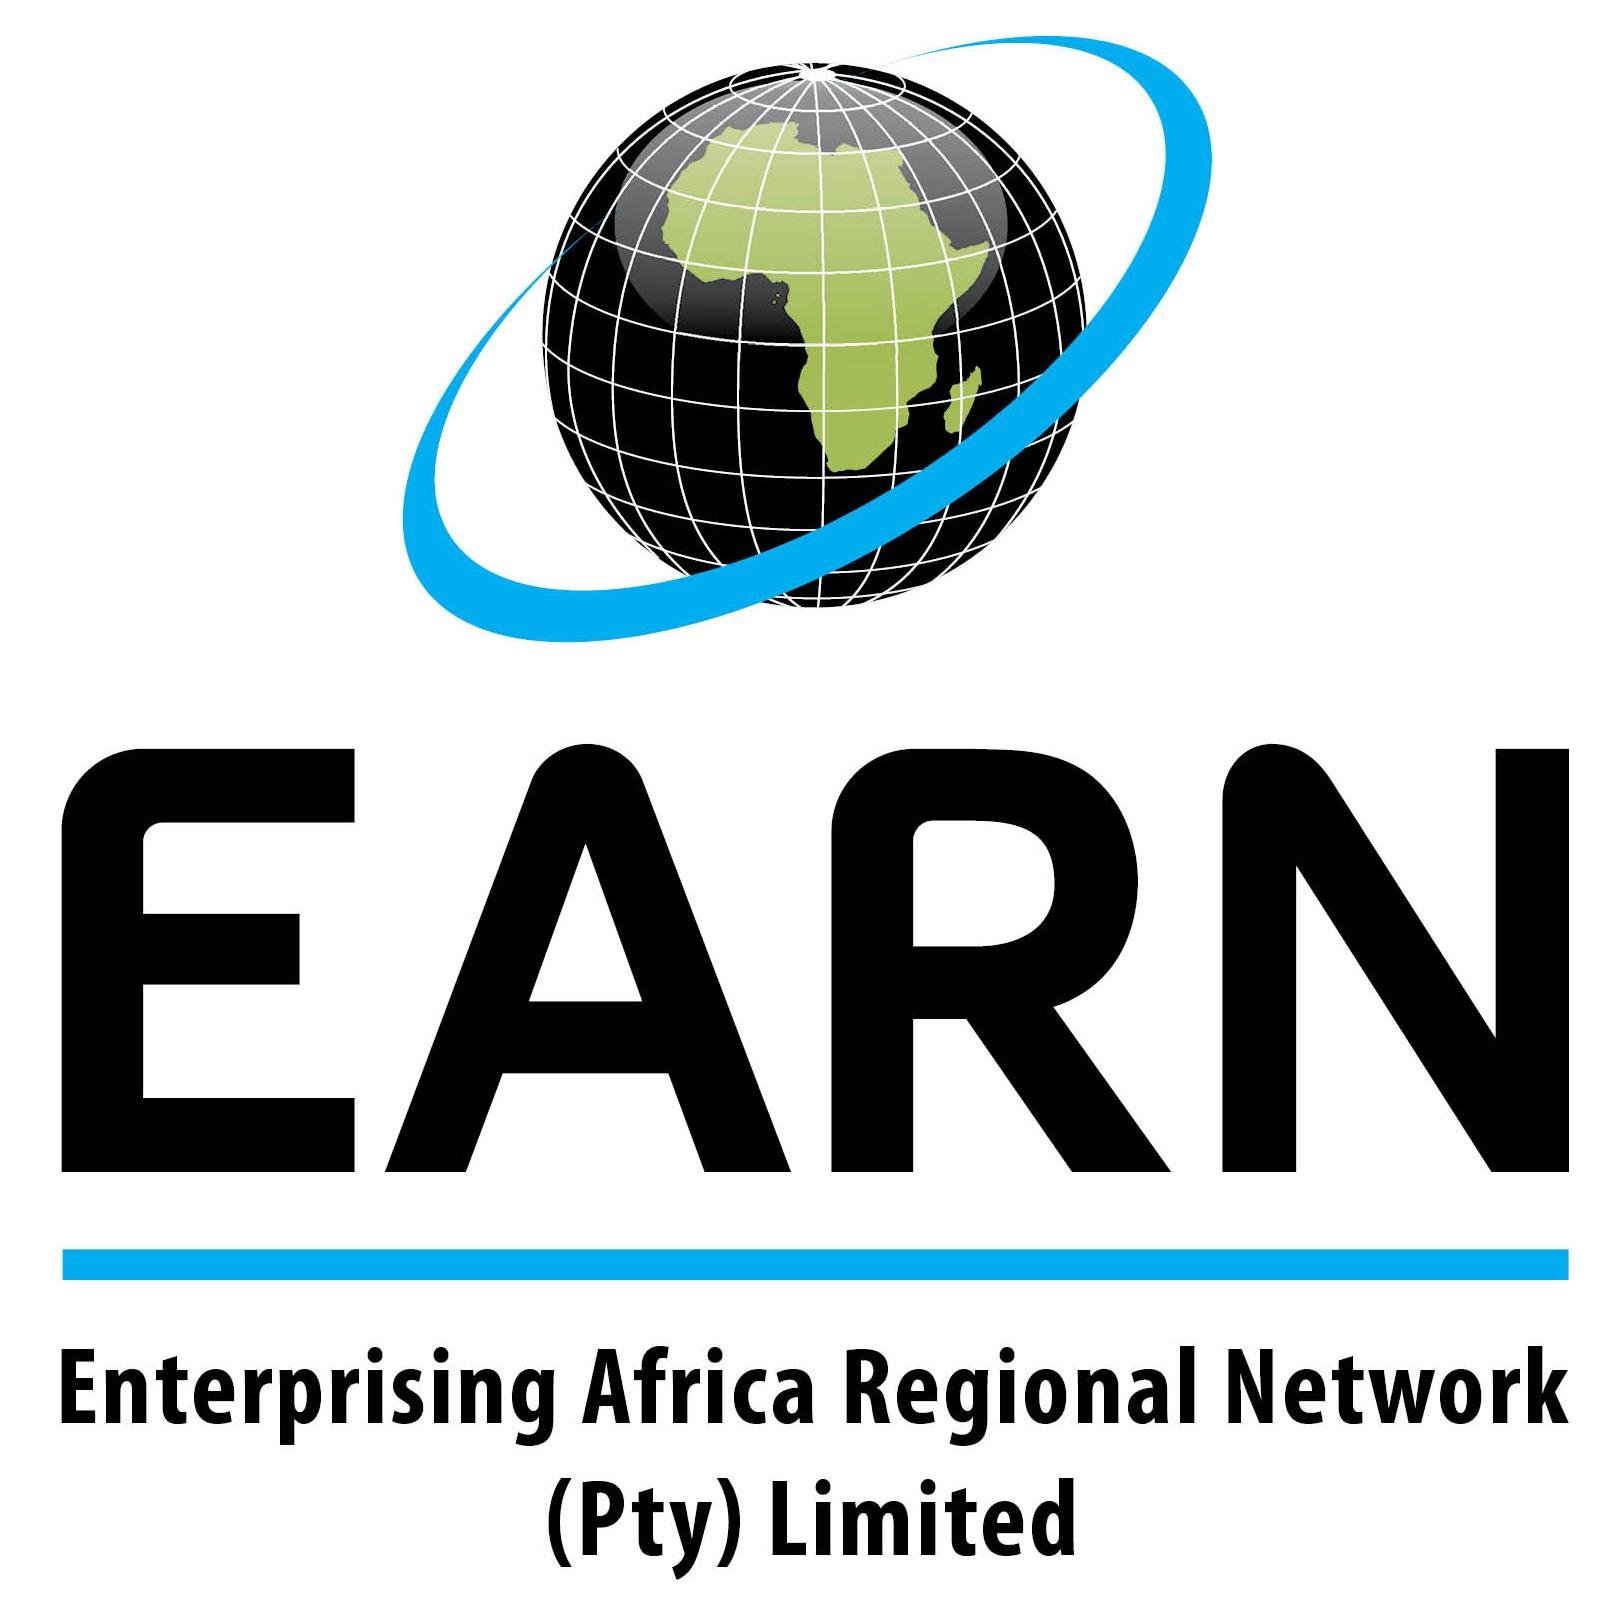 EARN offers 360° business support services to all business start-ups and existing SMME's. 
Our offering facilitates greater productivity and profitability.